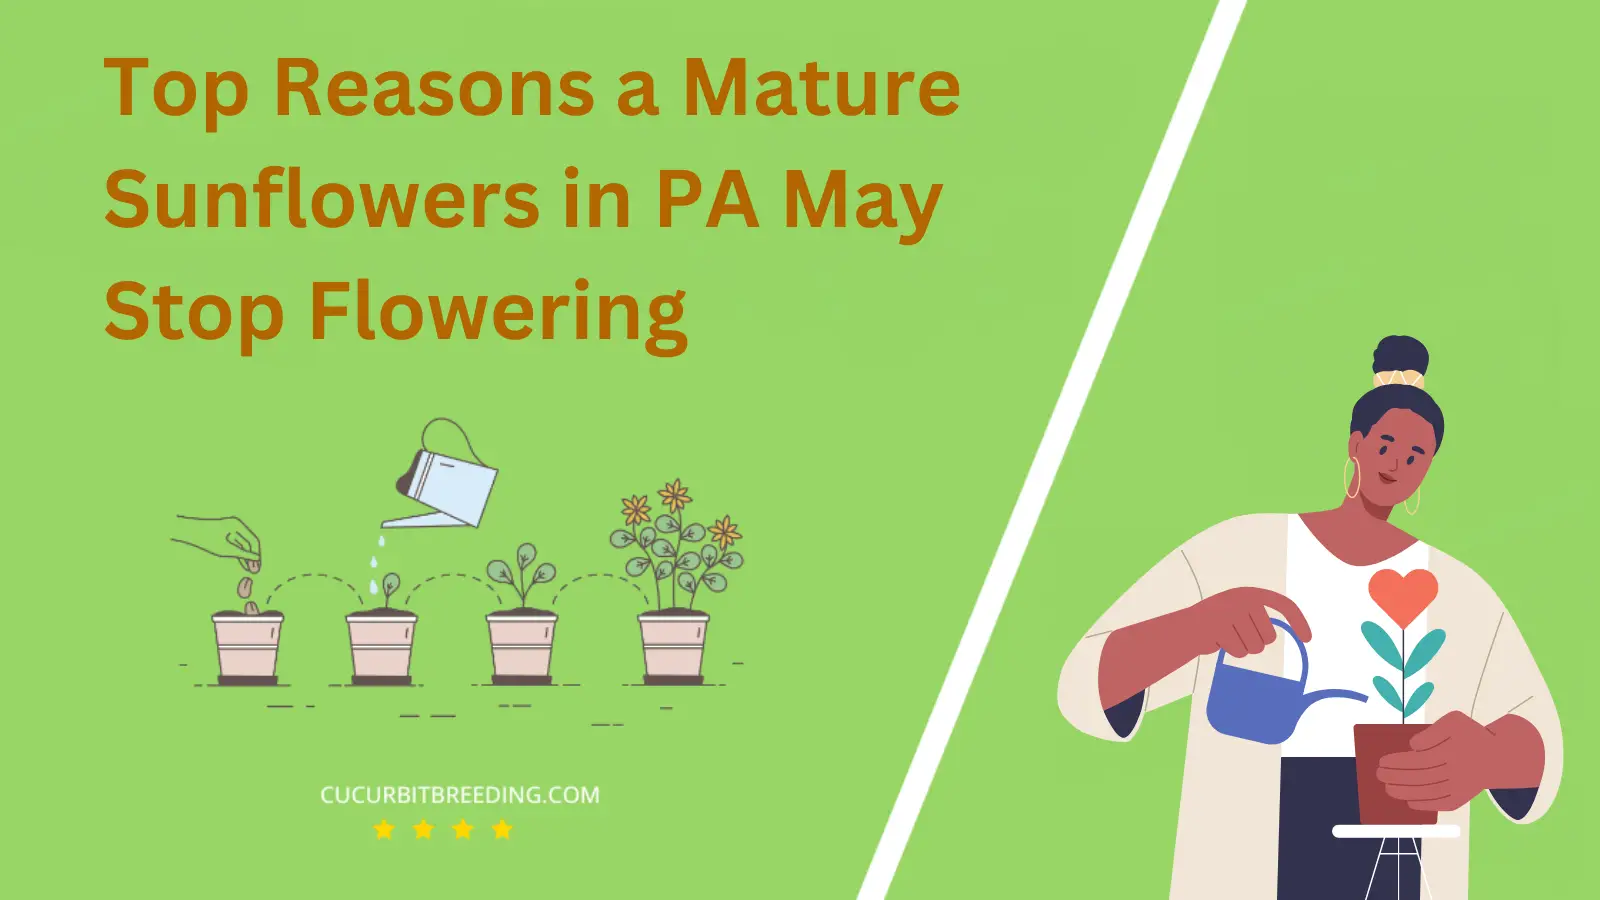 Top Reasons a Mature Sunflowers in PA May Stop Flowering